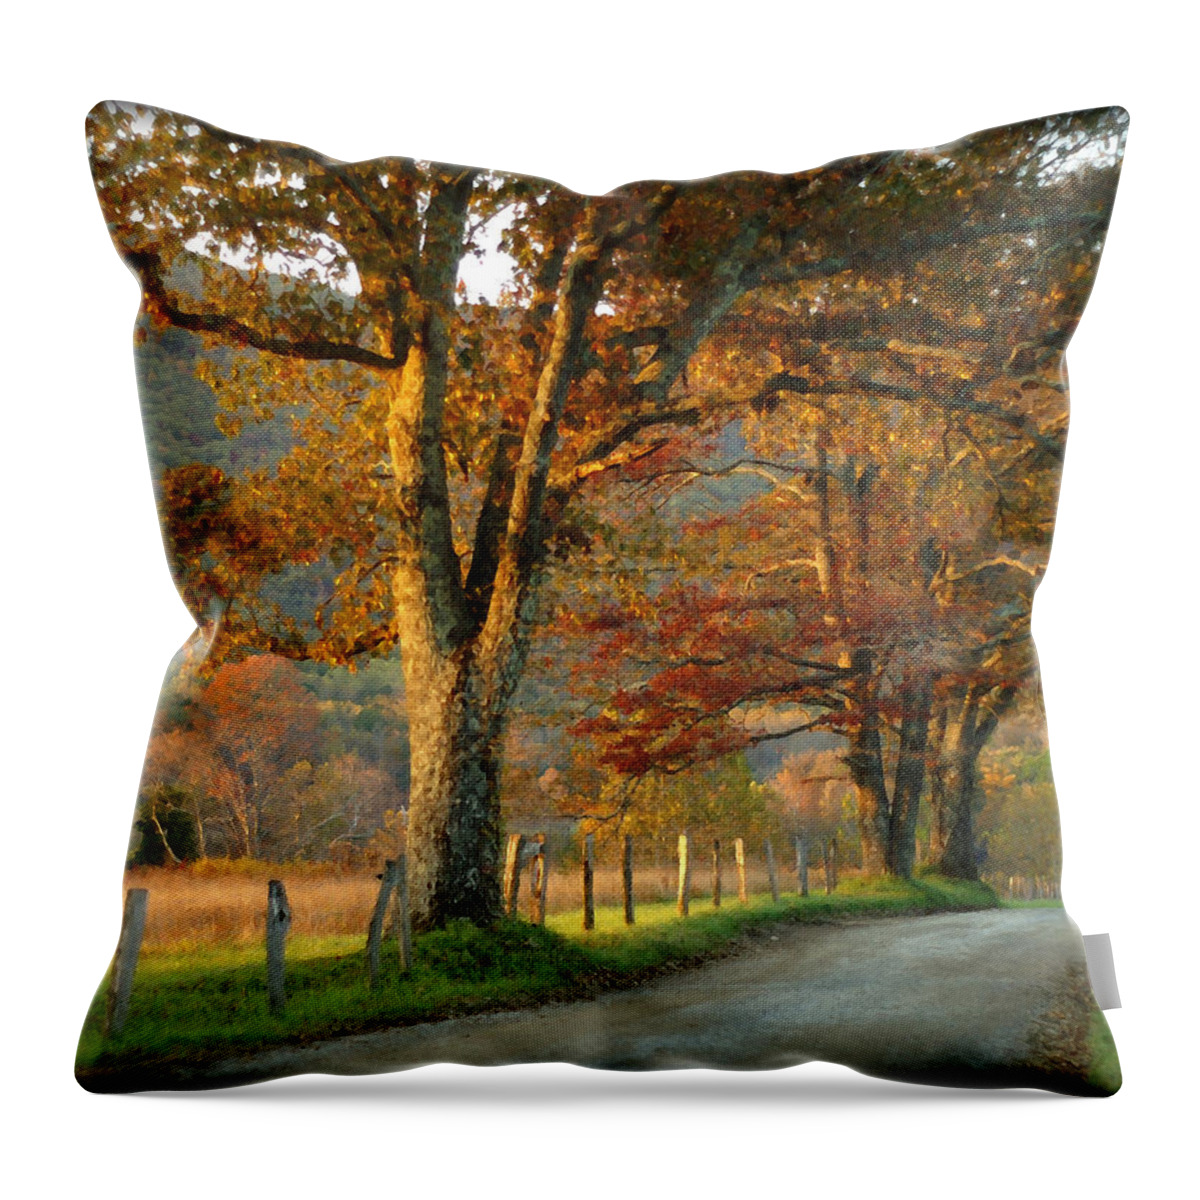 Autumn Throw Pillow featuring the photograph Autumn on Sparks Lane by TnBackroadsPhotos